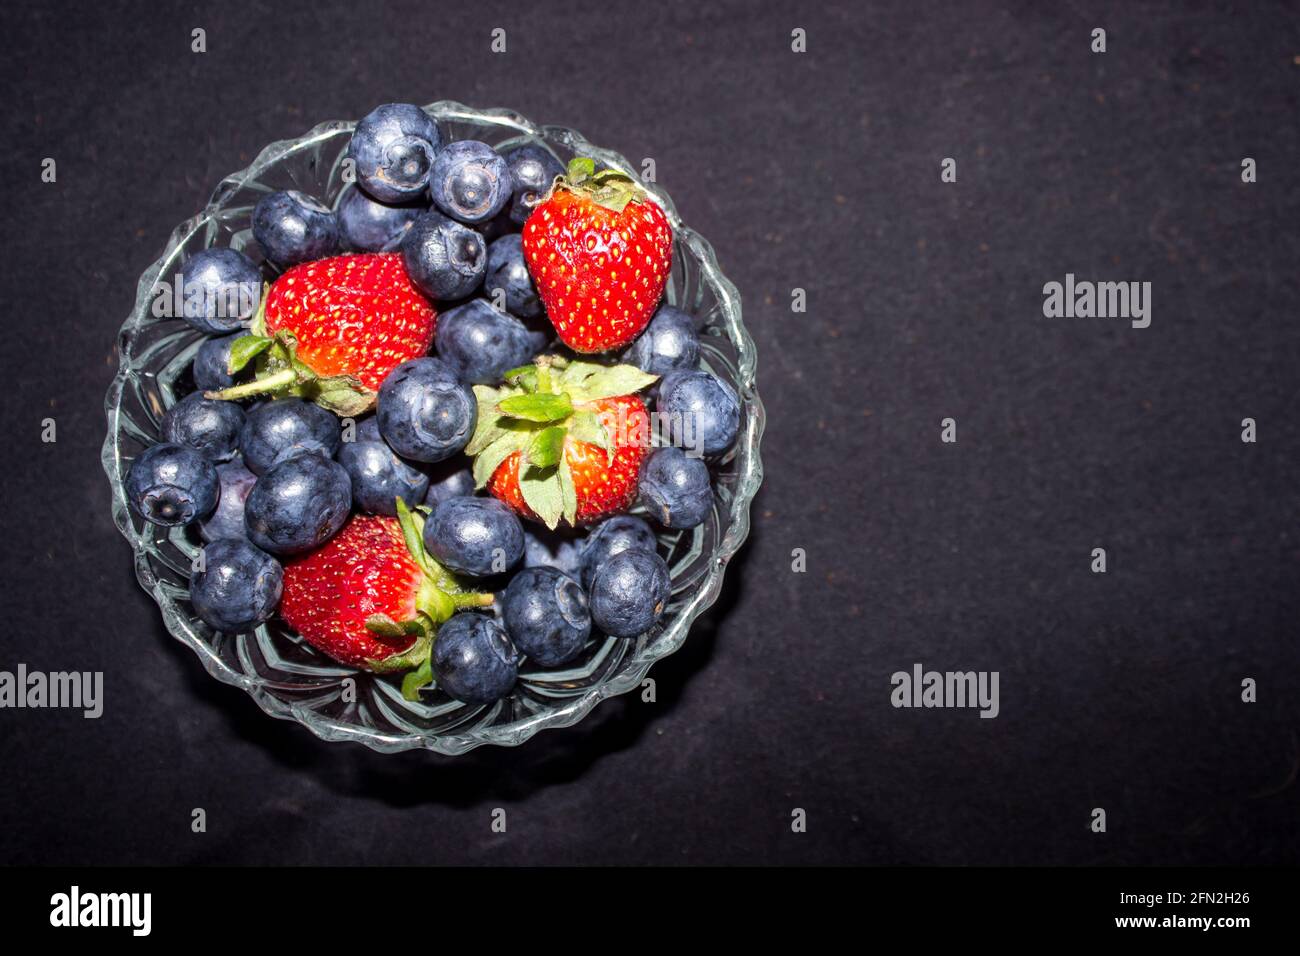 A small glass bowl filled with a mixture of blueberries and strawberries, against a black background Stock Photo